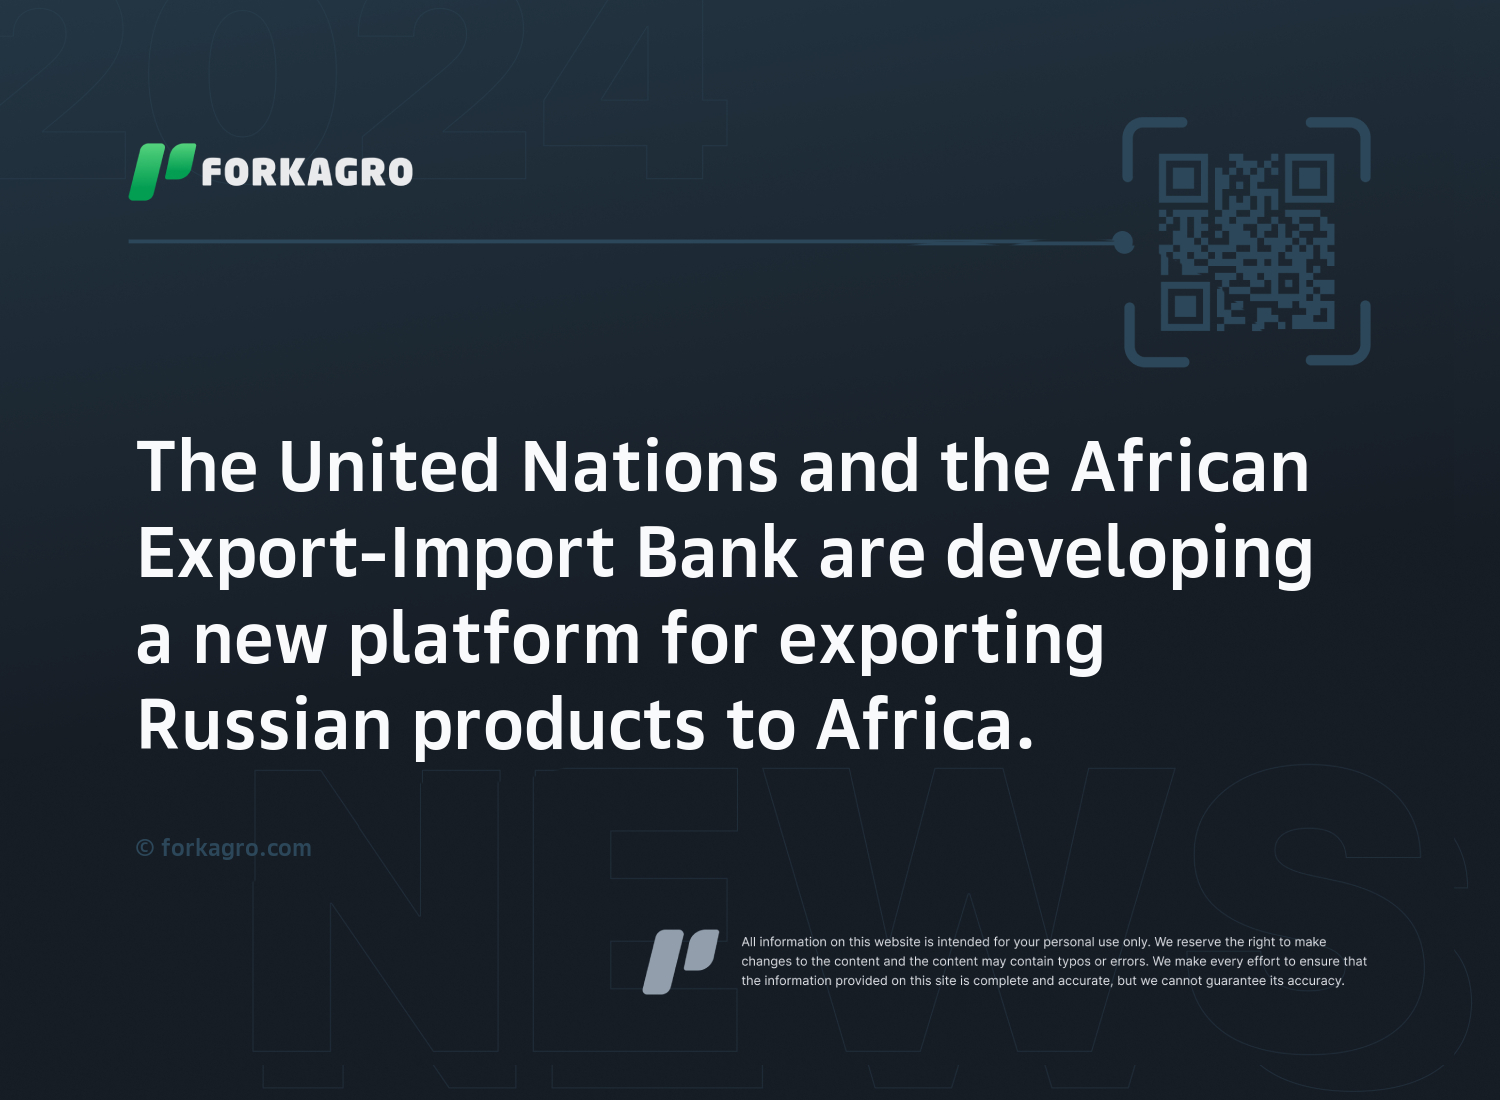 The United Nations and the African Export-Import Bank are developing a new platform for exporting Russian products to Africa.